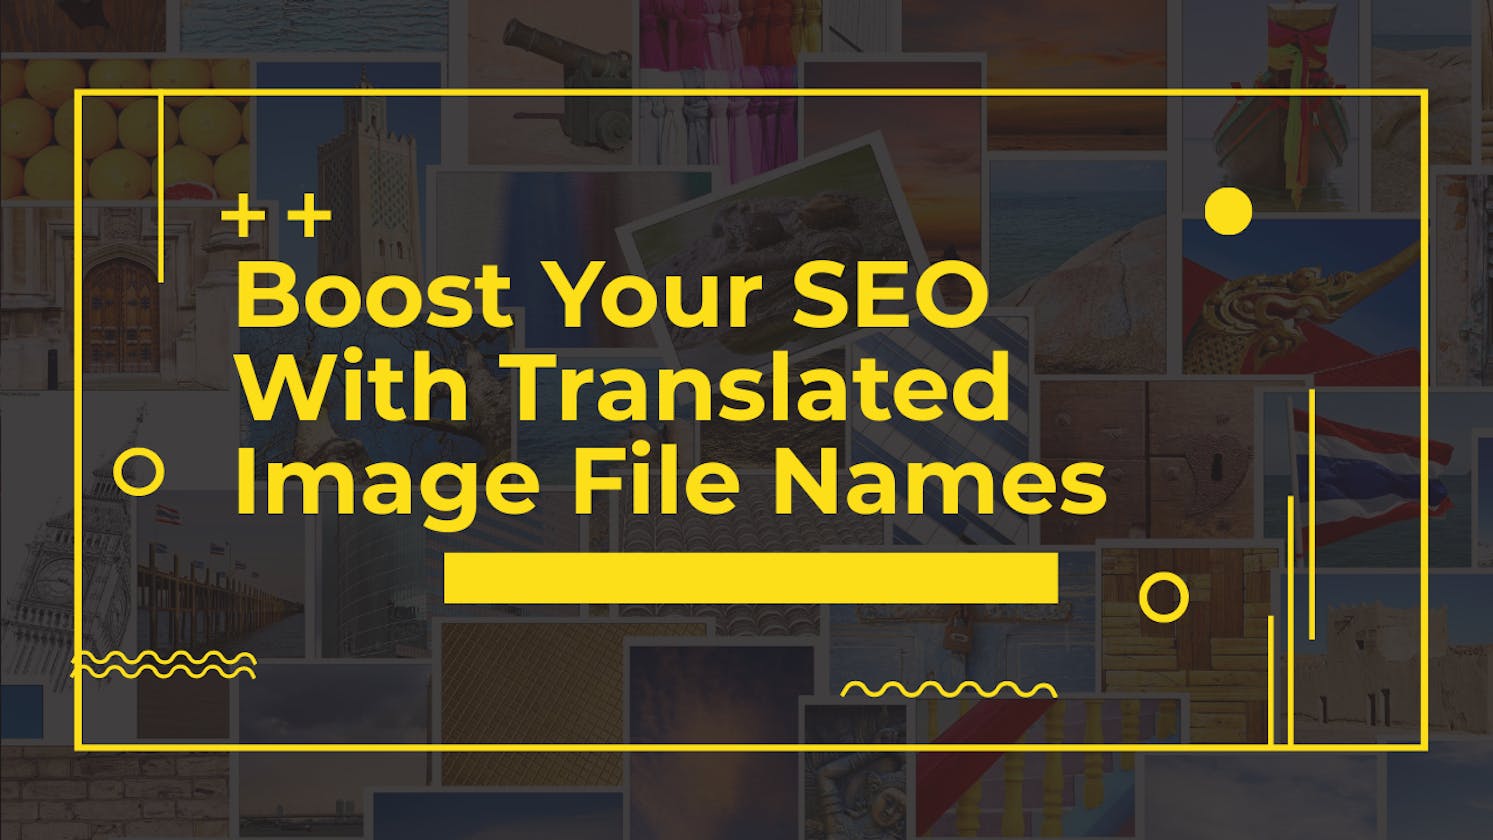 Boost Your SEO With Translated Image File Names